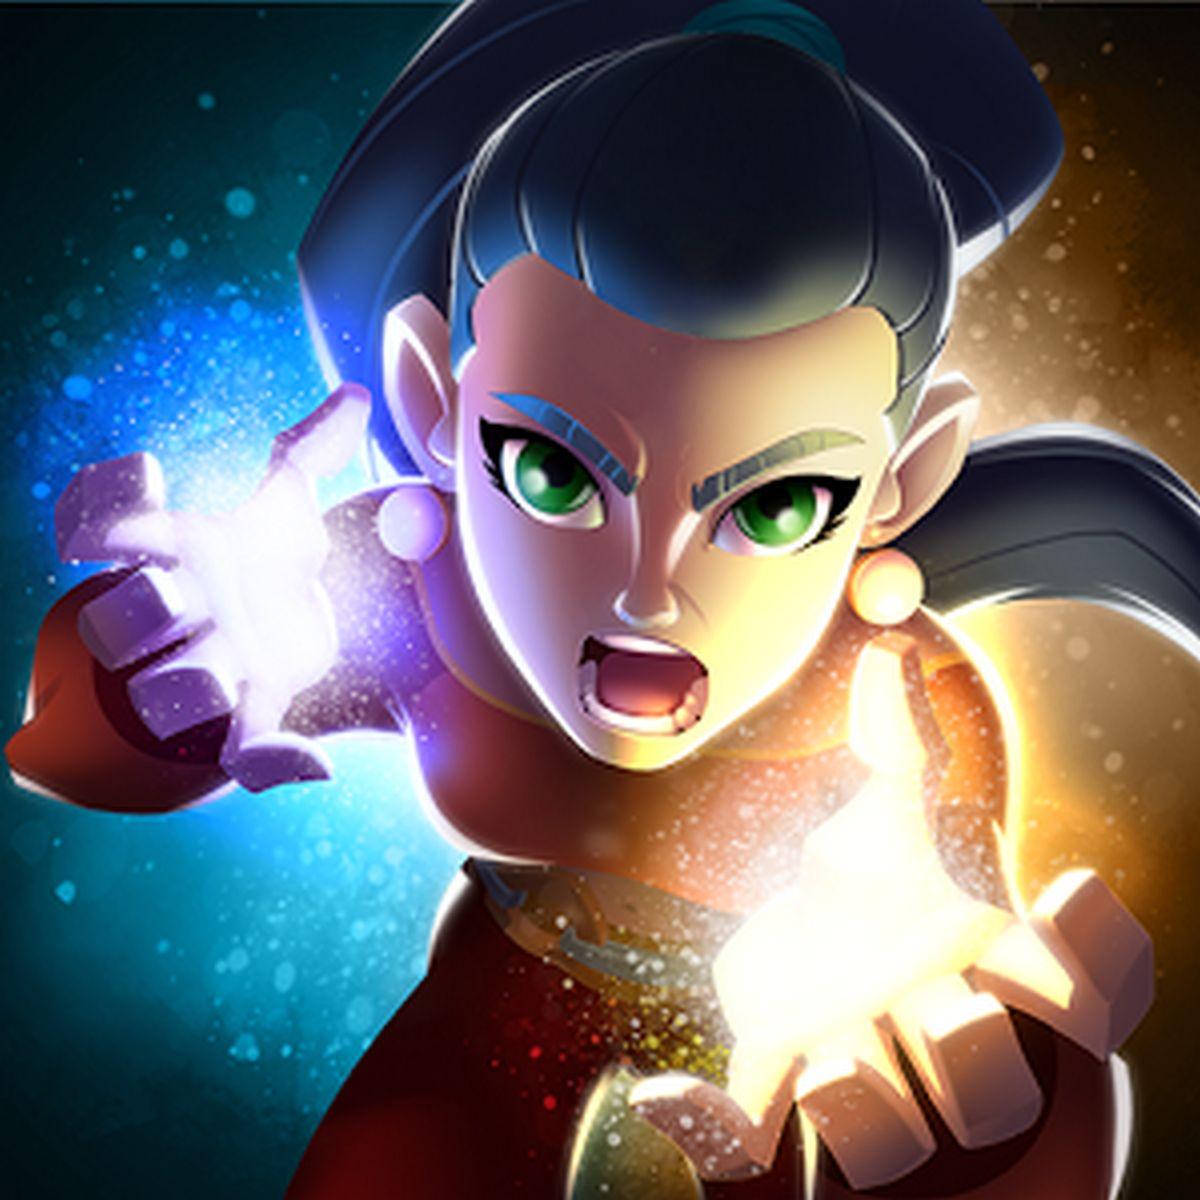 Might and Magic - Battle RPG APK MOD